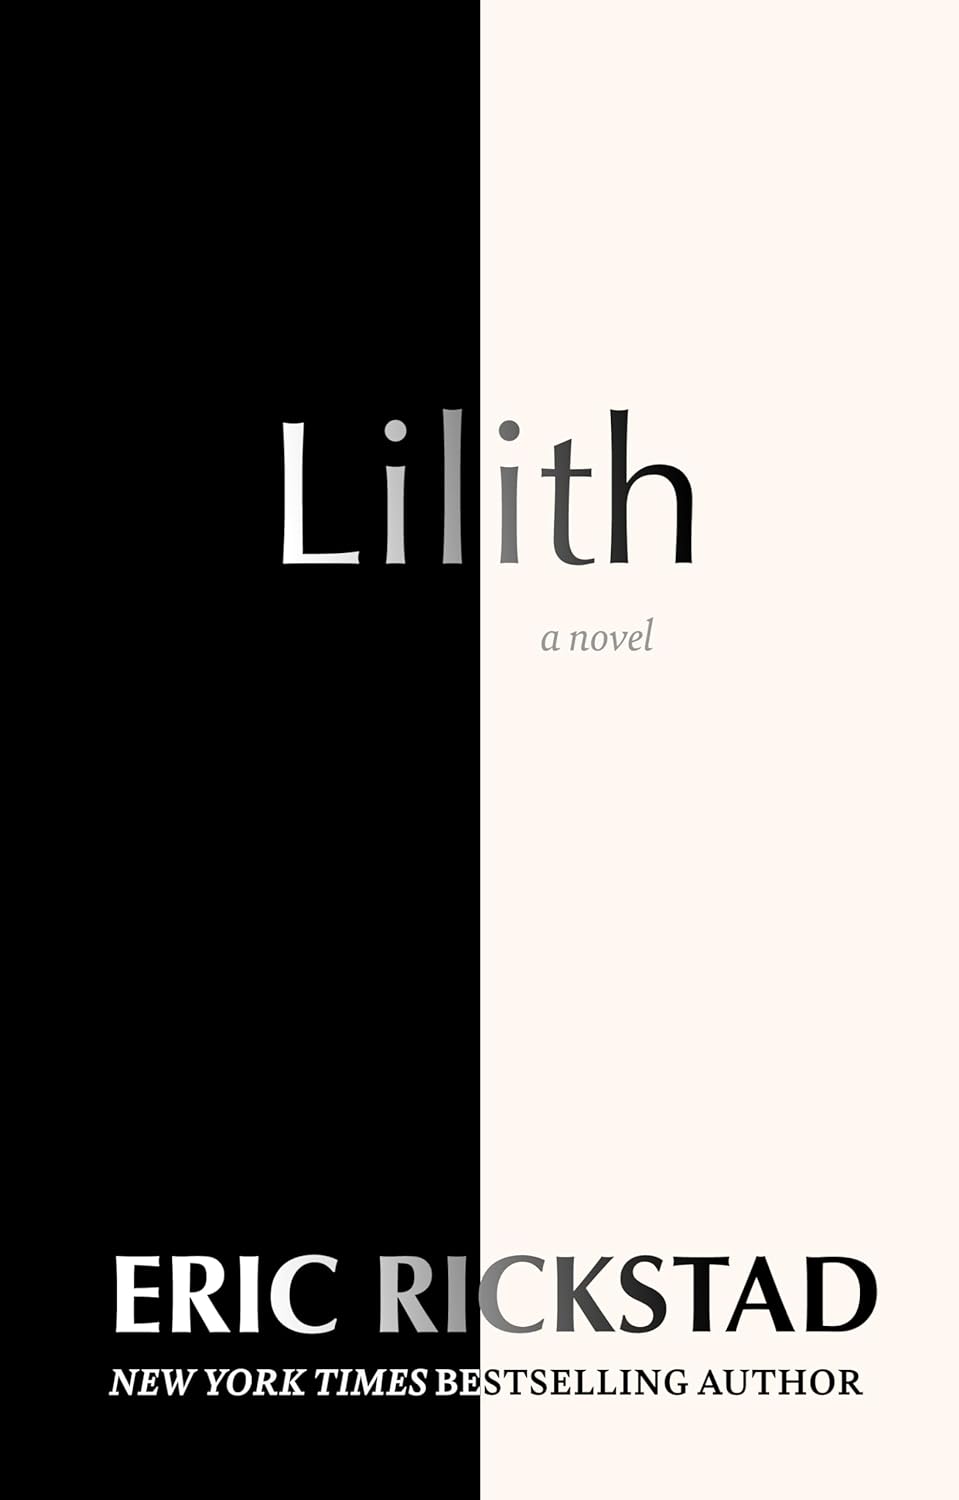 Lilith by Eric Rickstad